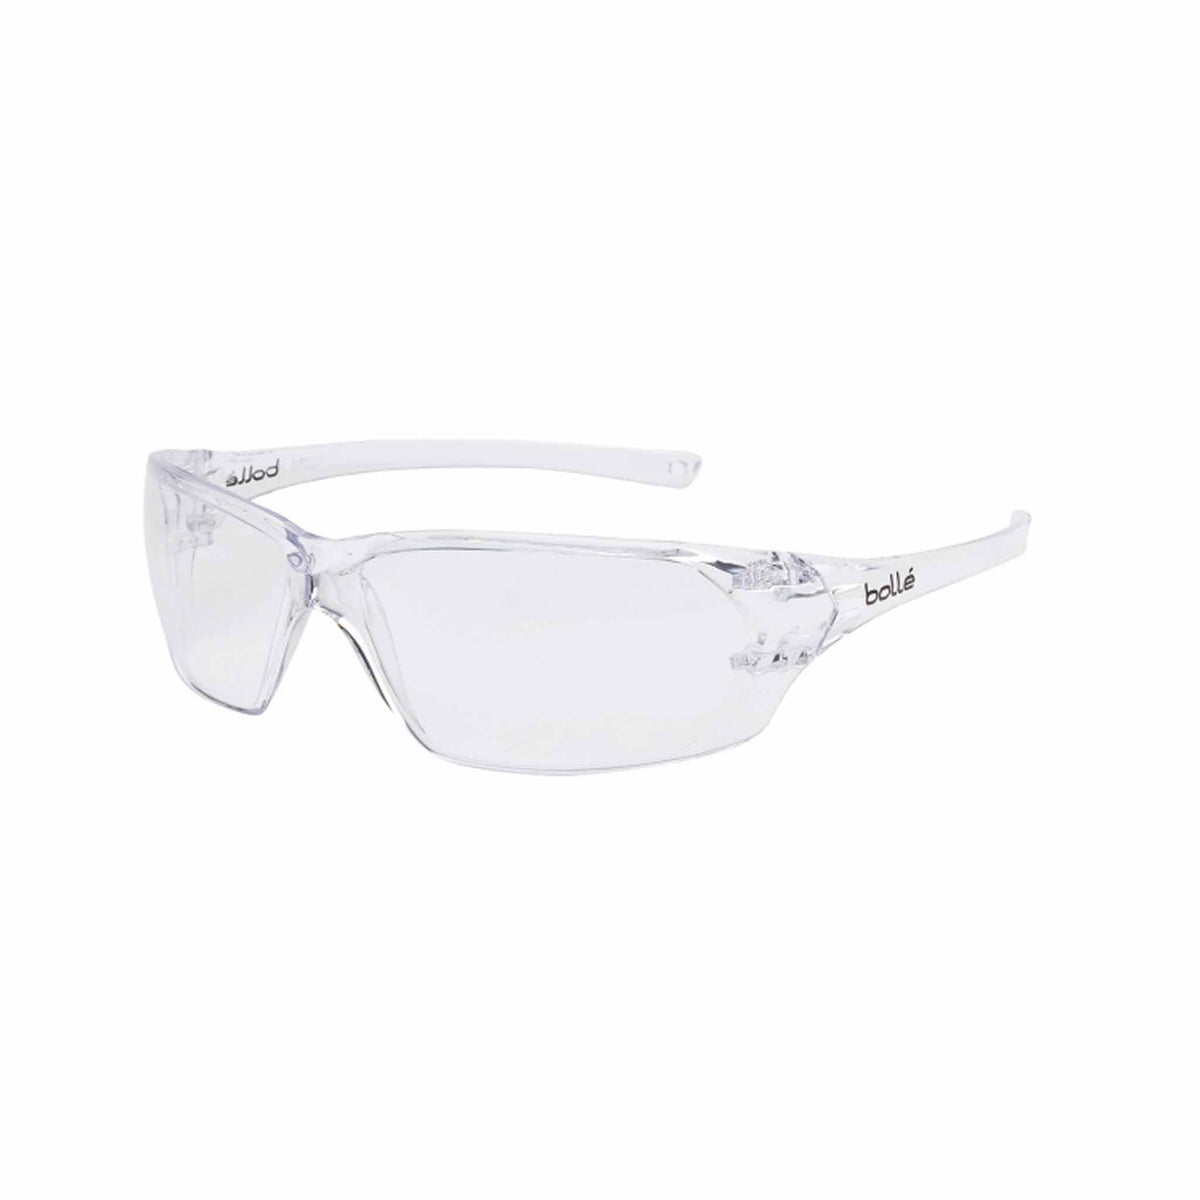 bolle prism glasses with clear lens